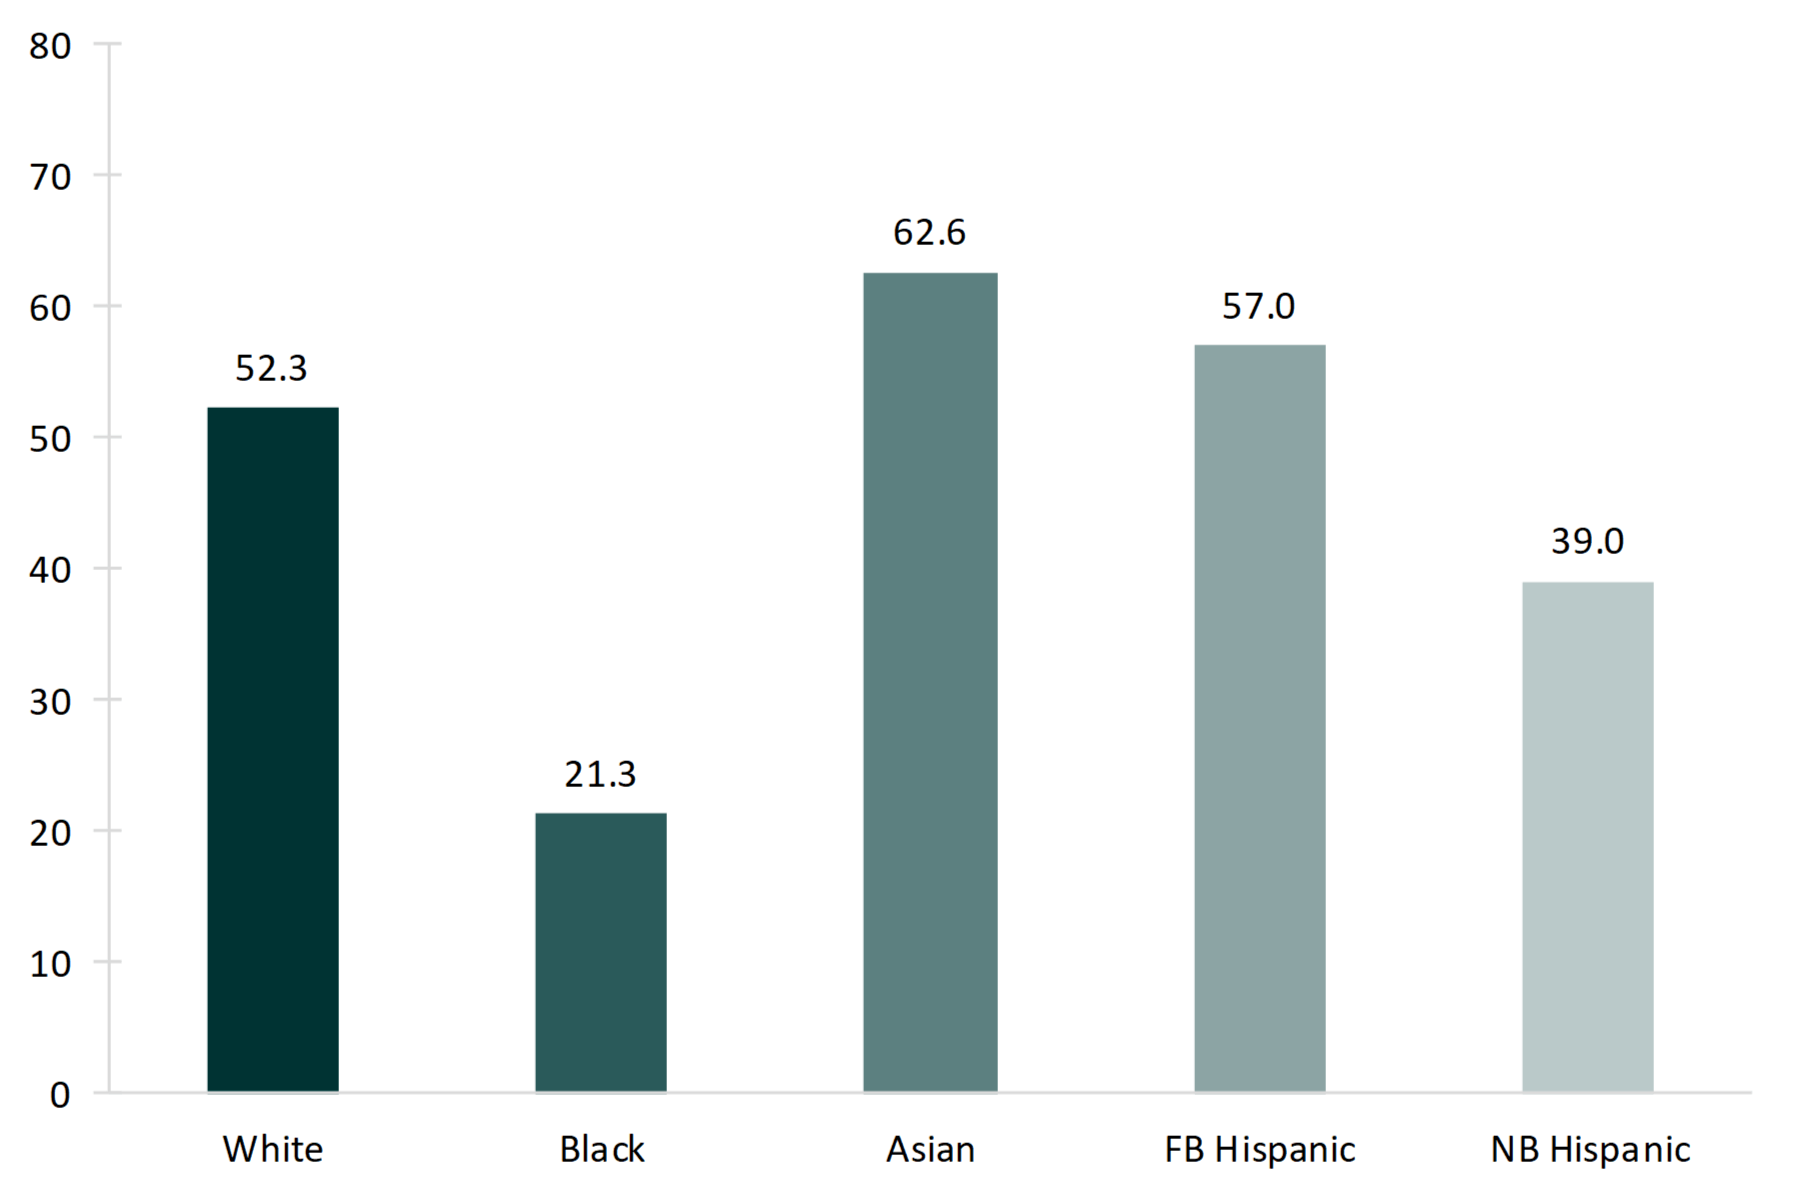 teal bar chart showing Figure 2. First Marriage Rate for Women Aged 18 and Older by Race, 2018